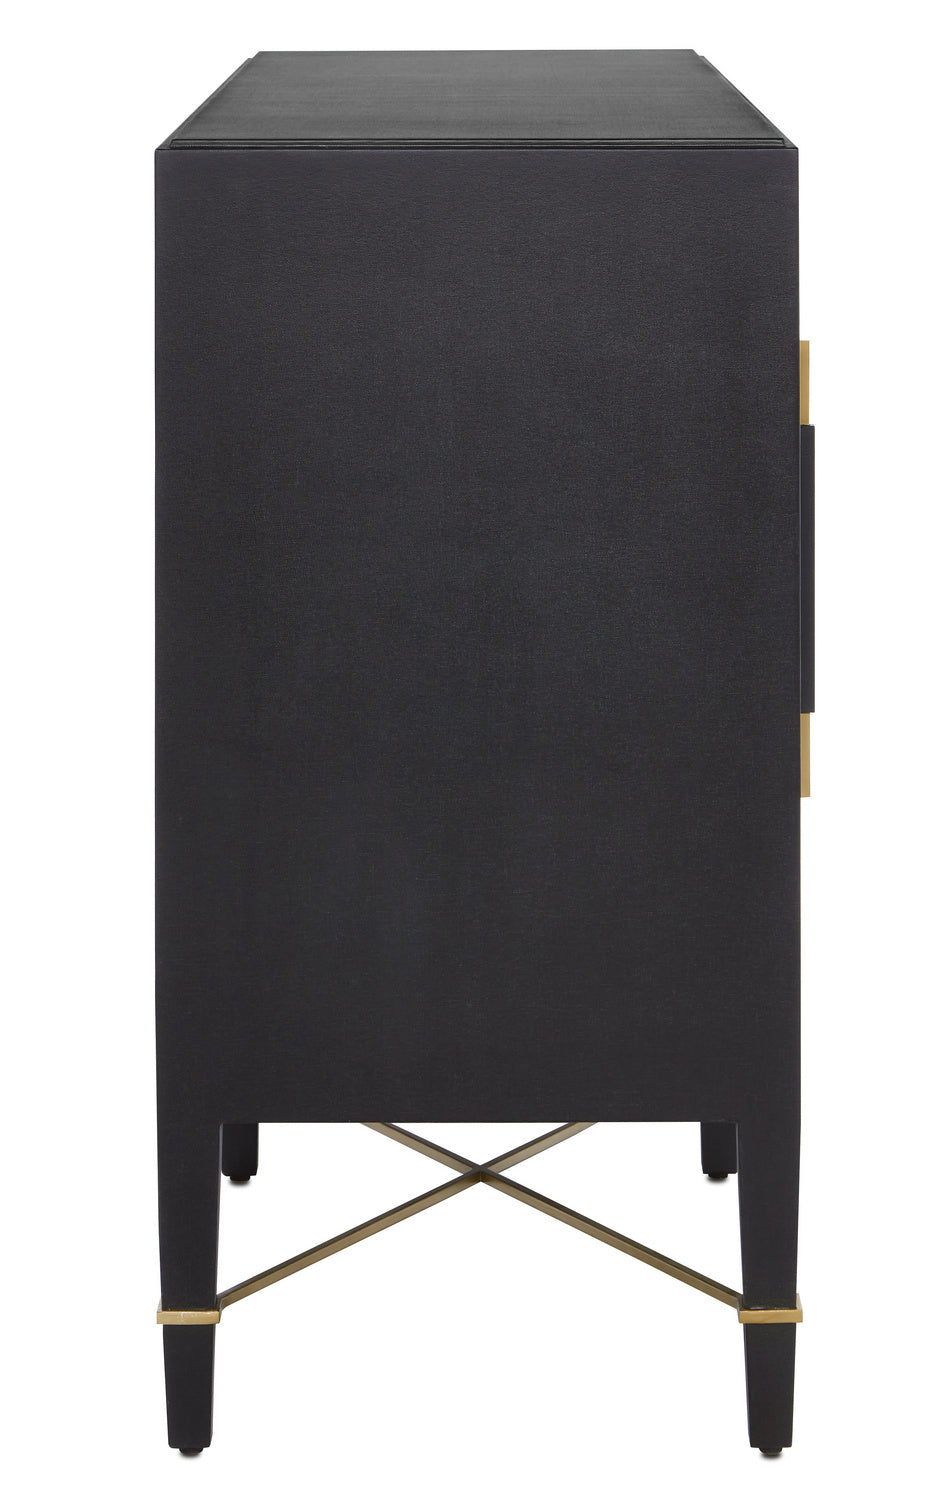 Sideboard from the Verona collection in Black Lacquered Linen/Champagne Metal finish